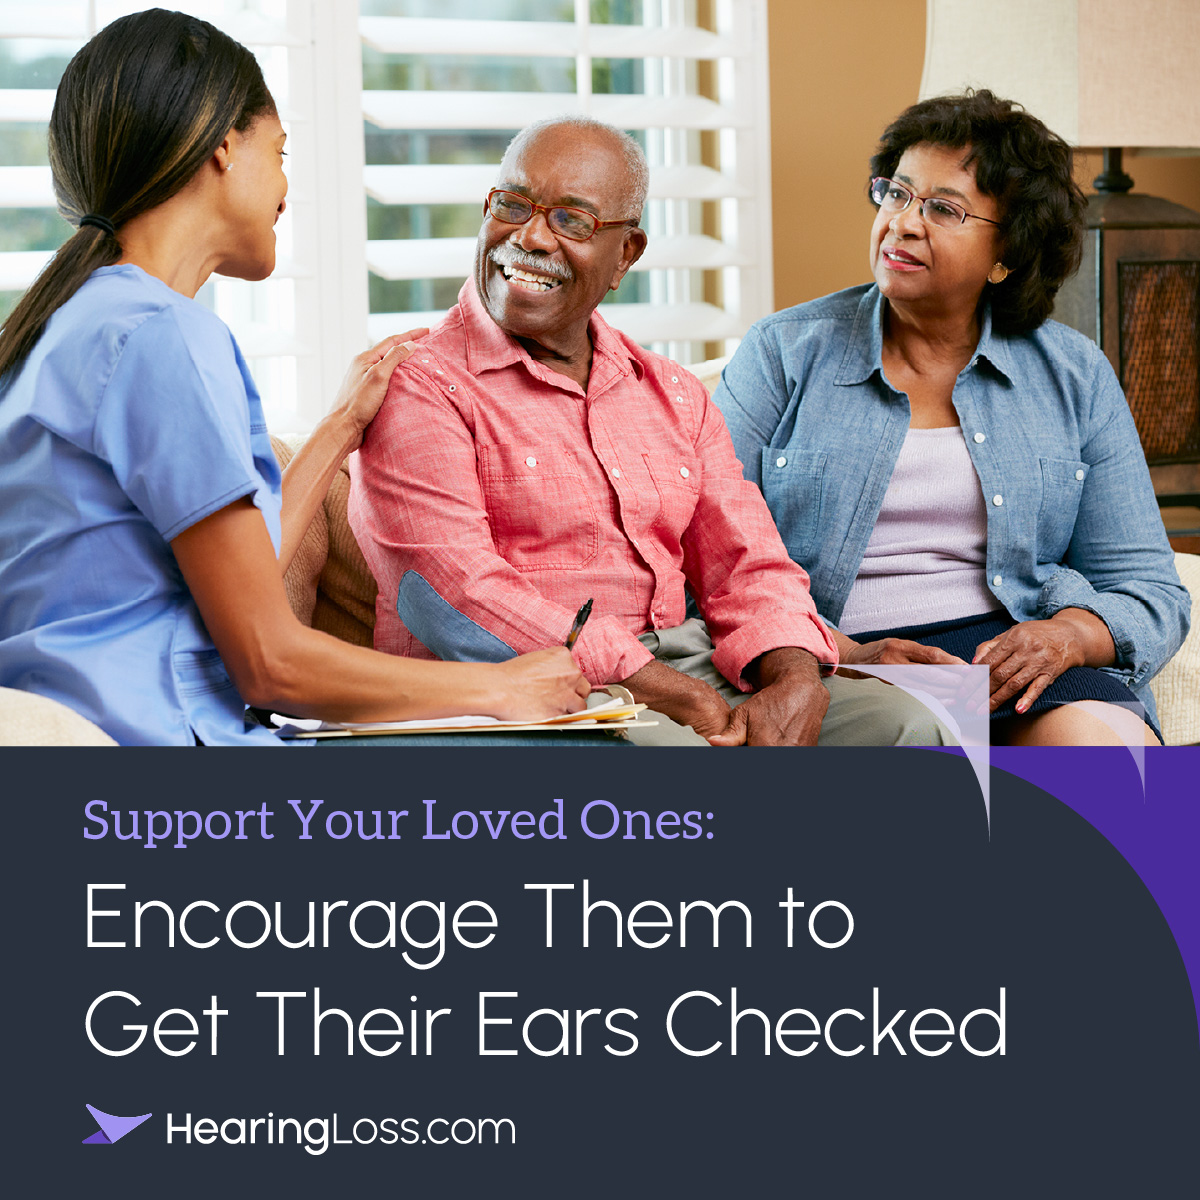 Support your loved ones and encourage them to get their ears checked! Each day is a learning curve.
...
#hearinglossdotcom #hearinglosscommunity #deaf #hearingaidsarecool #love #hearinglossprevention #hearinglosssupport